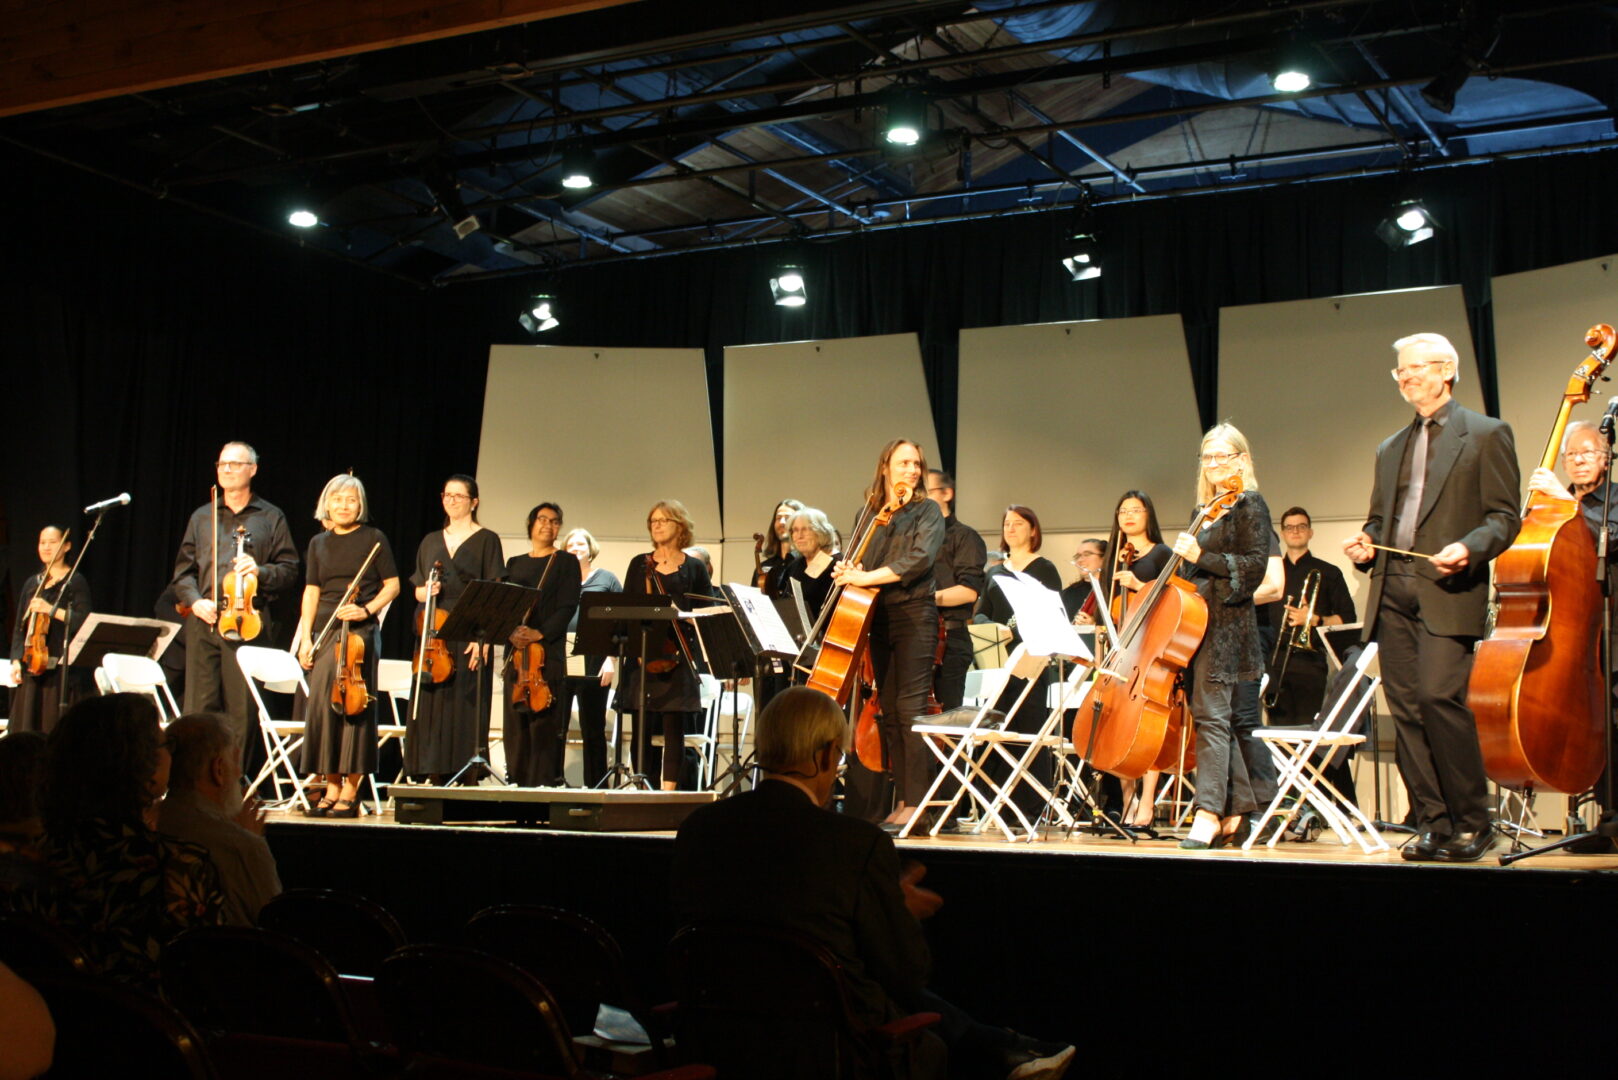 An orchestra stands facing an audience. The front row of the orchestra features violinists and cellists.